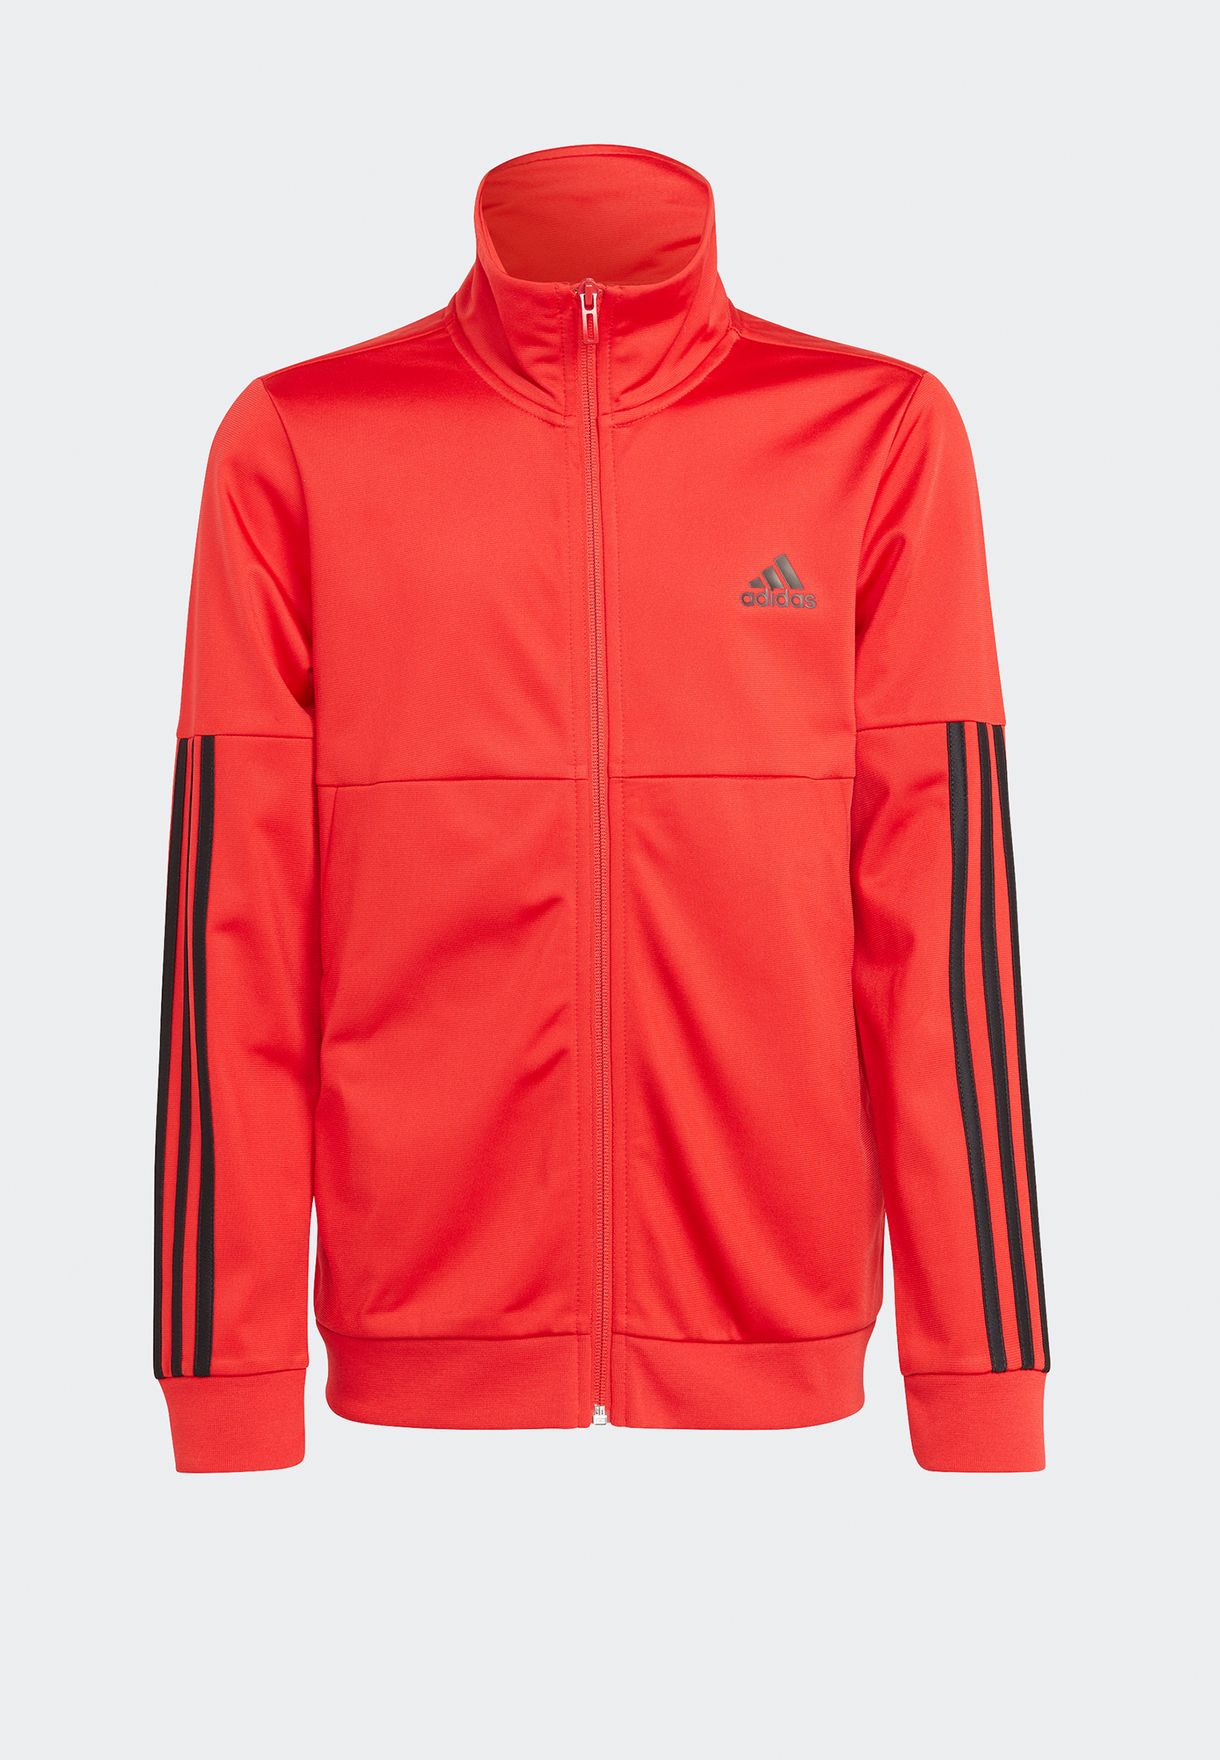 Youth 3 Stripes Team Tracksuit